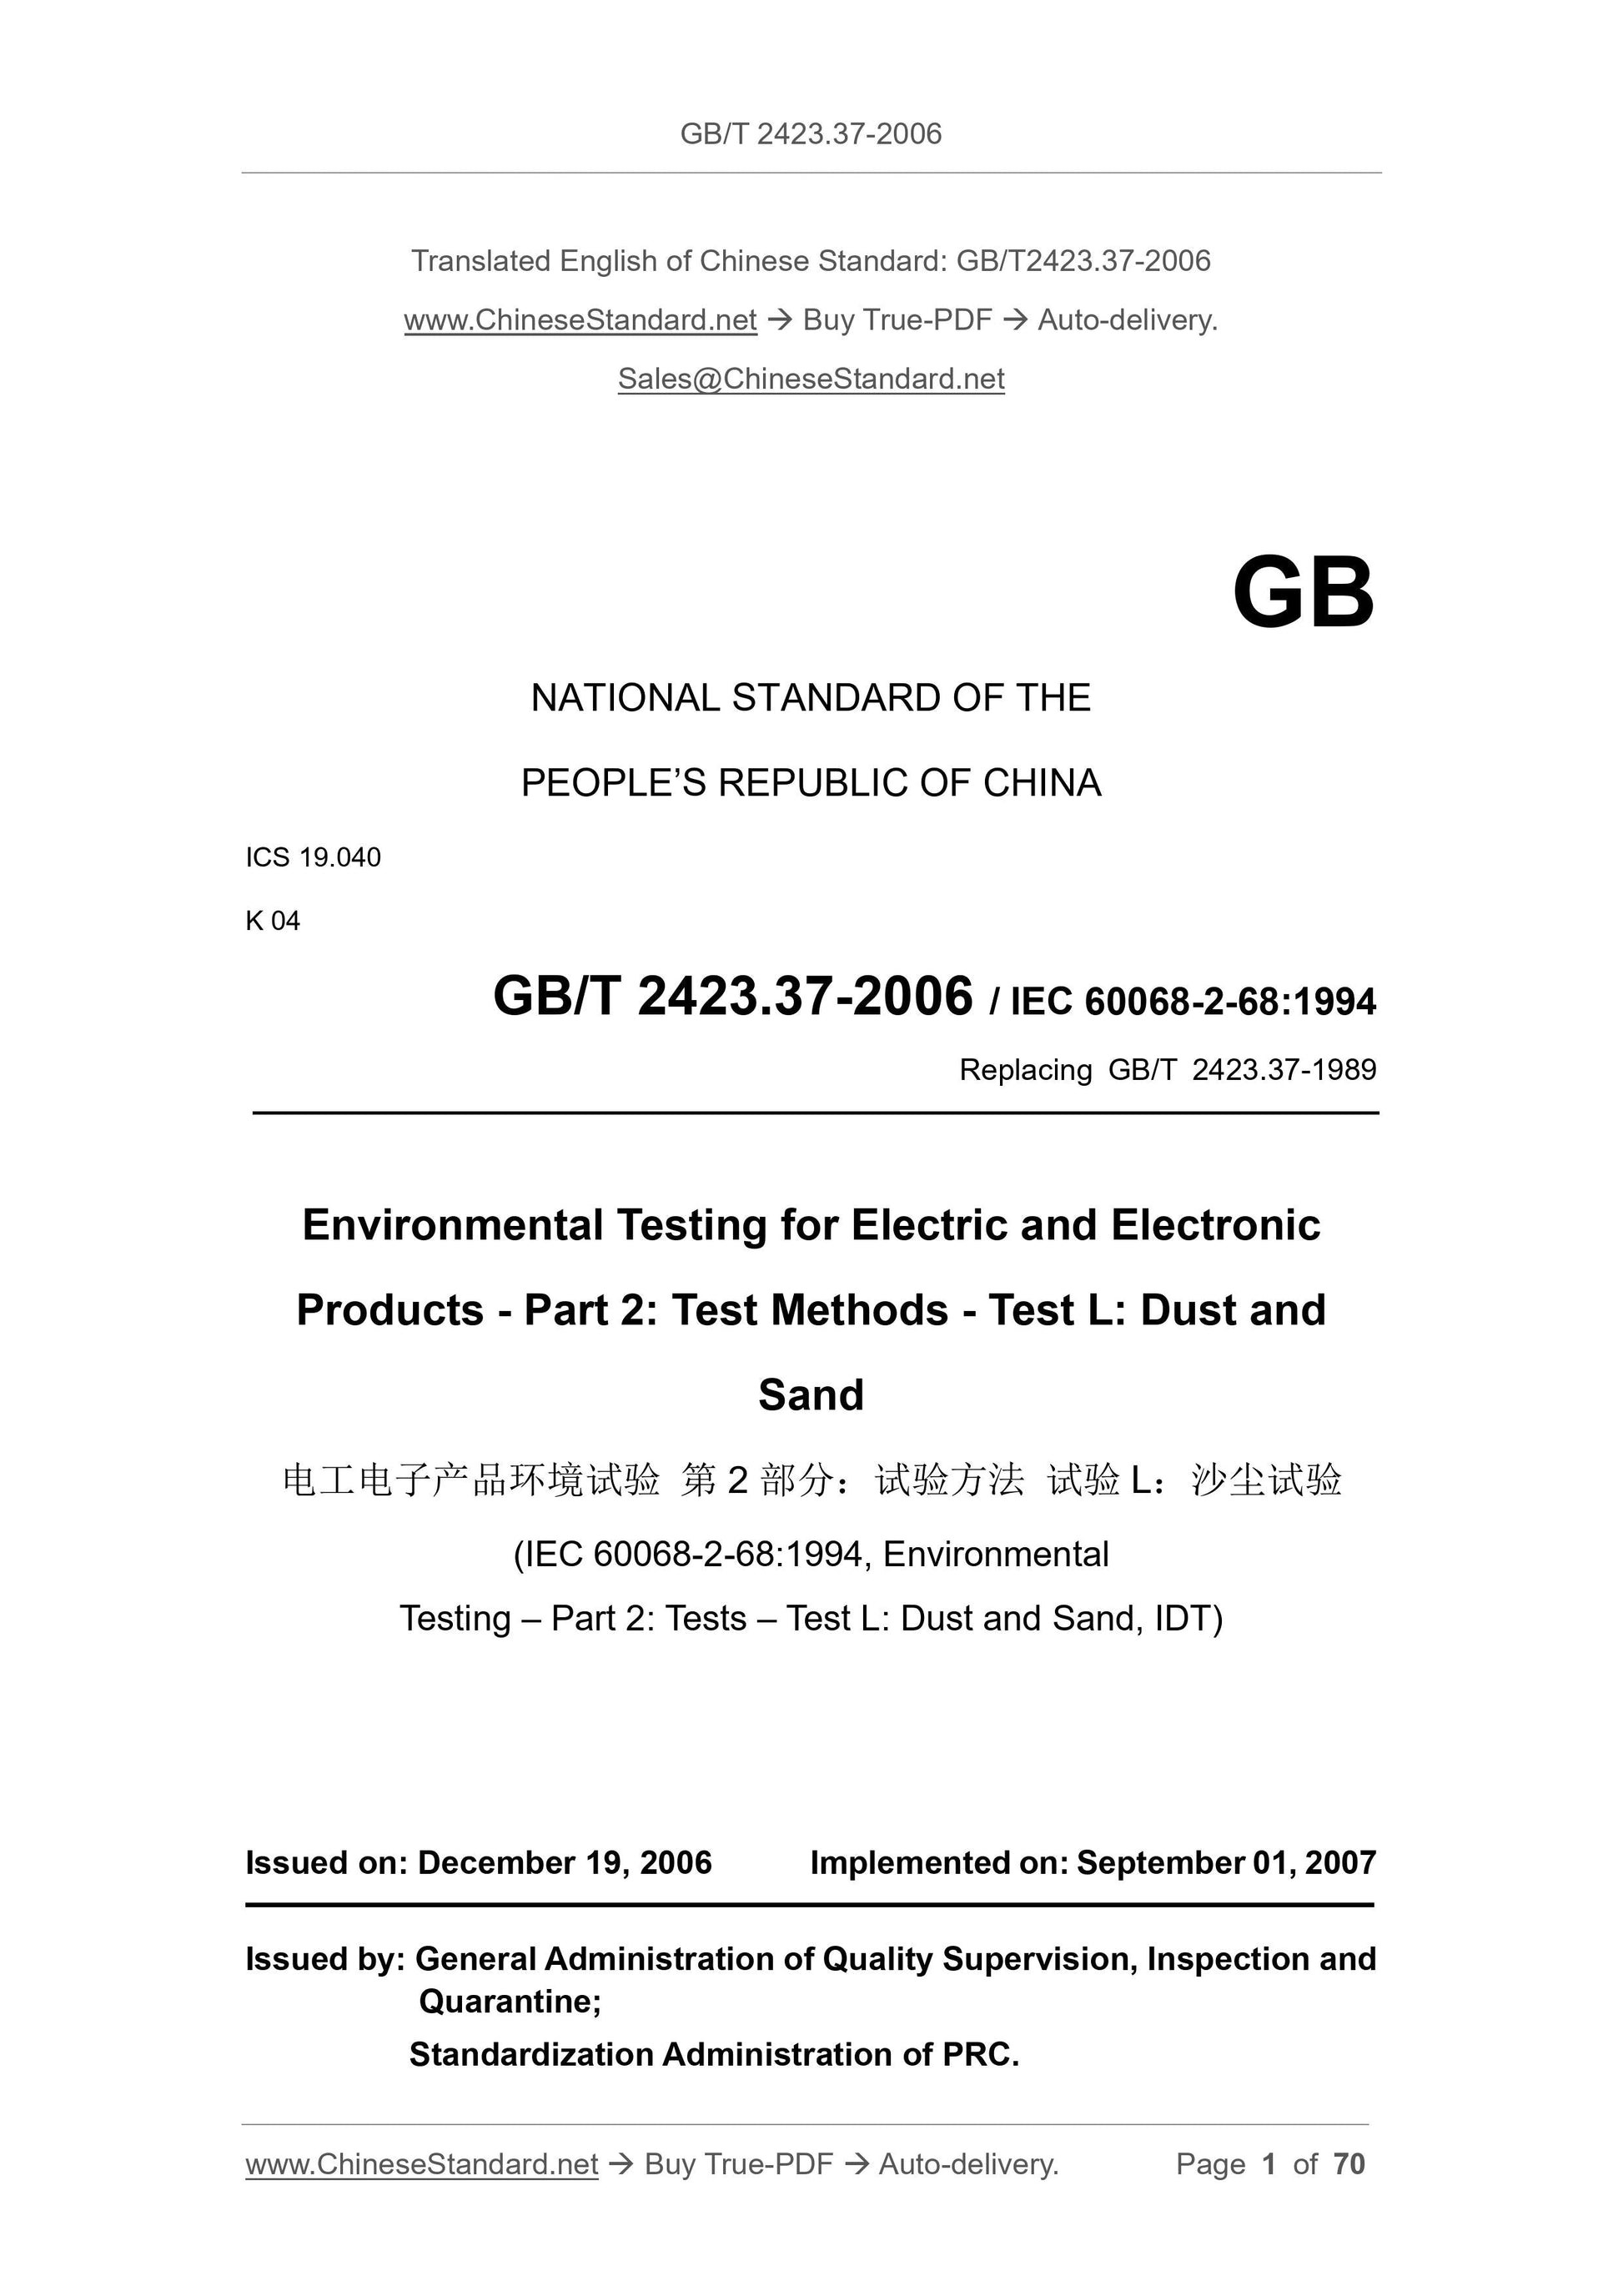 GB/T 2423.37-2006 Page 1